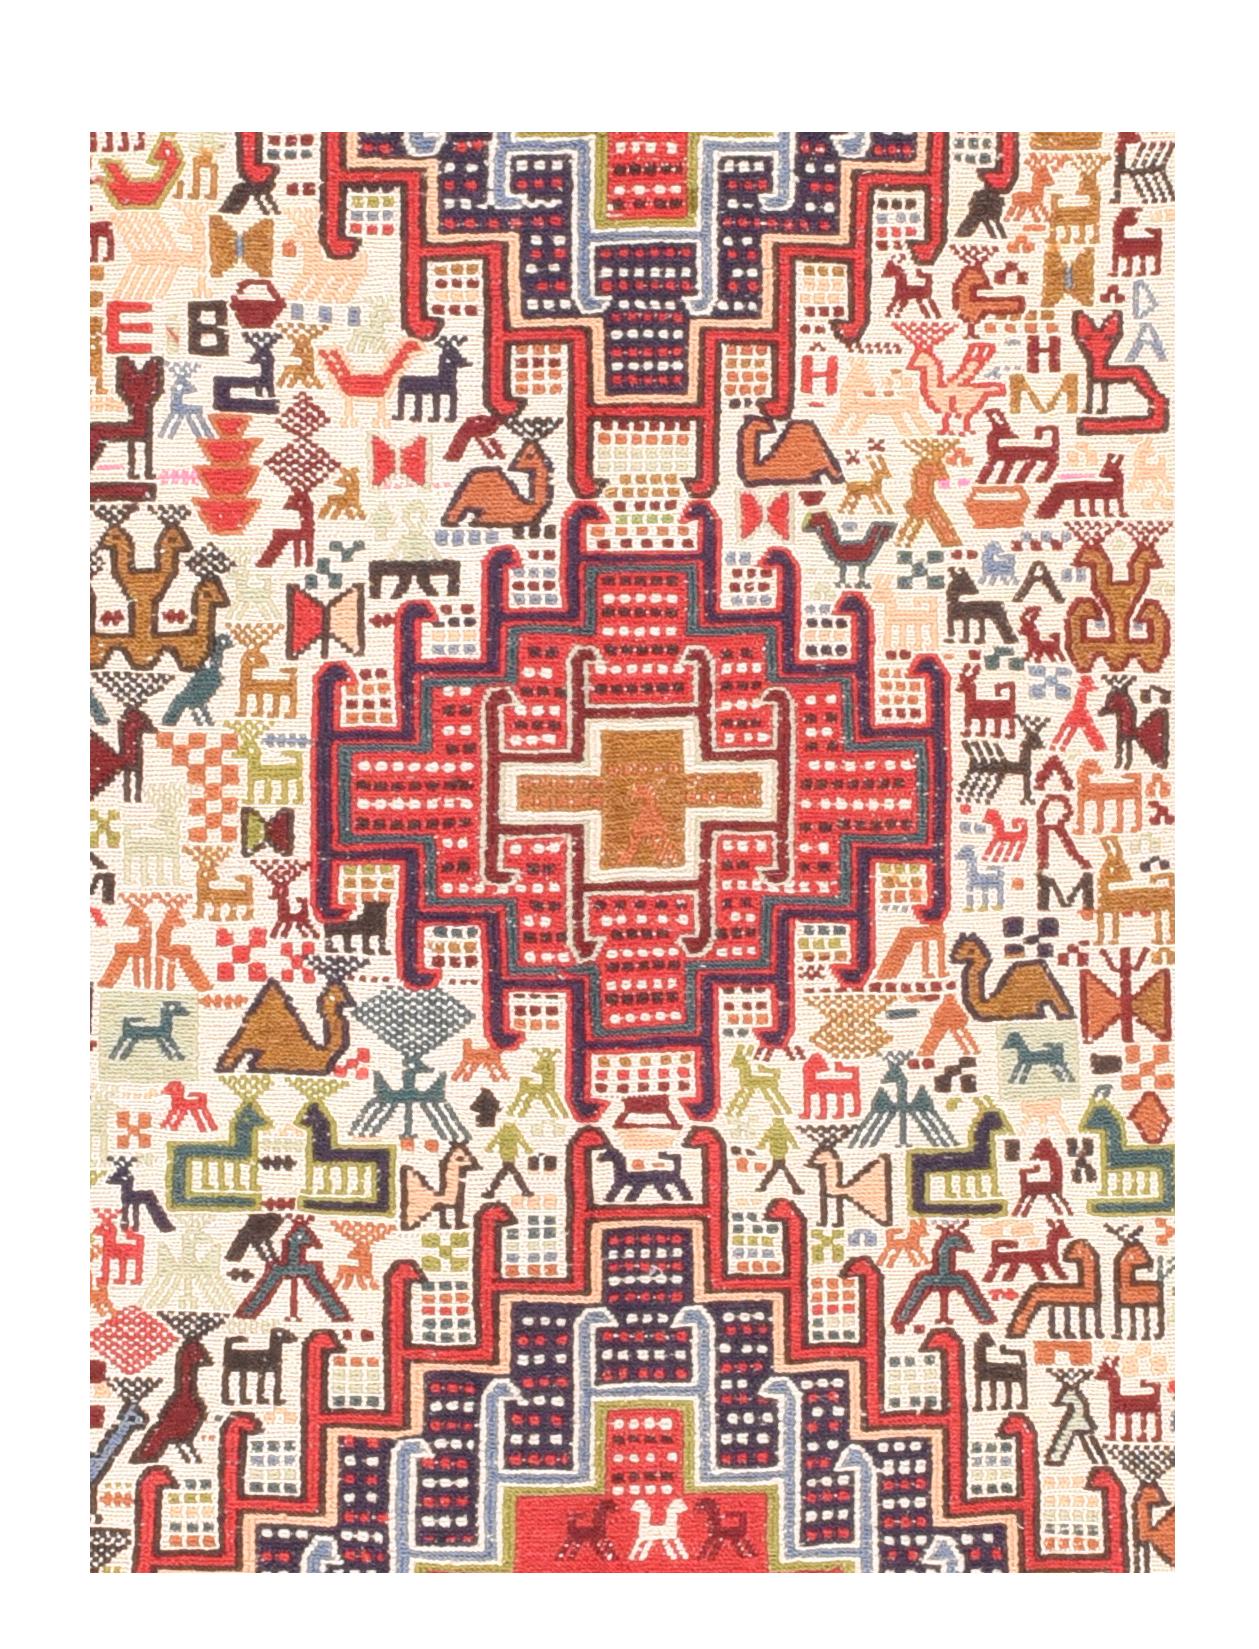 Senneh rug, Senneh also spelled Senna or Sehna, handwoven floor covering made by Kurds who live in or around the town of Senneh (now more properly Sanandaj) in western Iran. The pile rugs and kilims of Senneh are prized for their delicate pattern